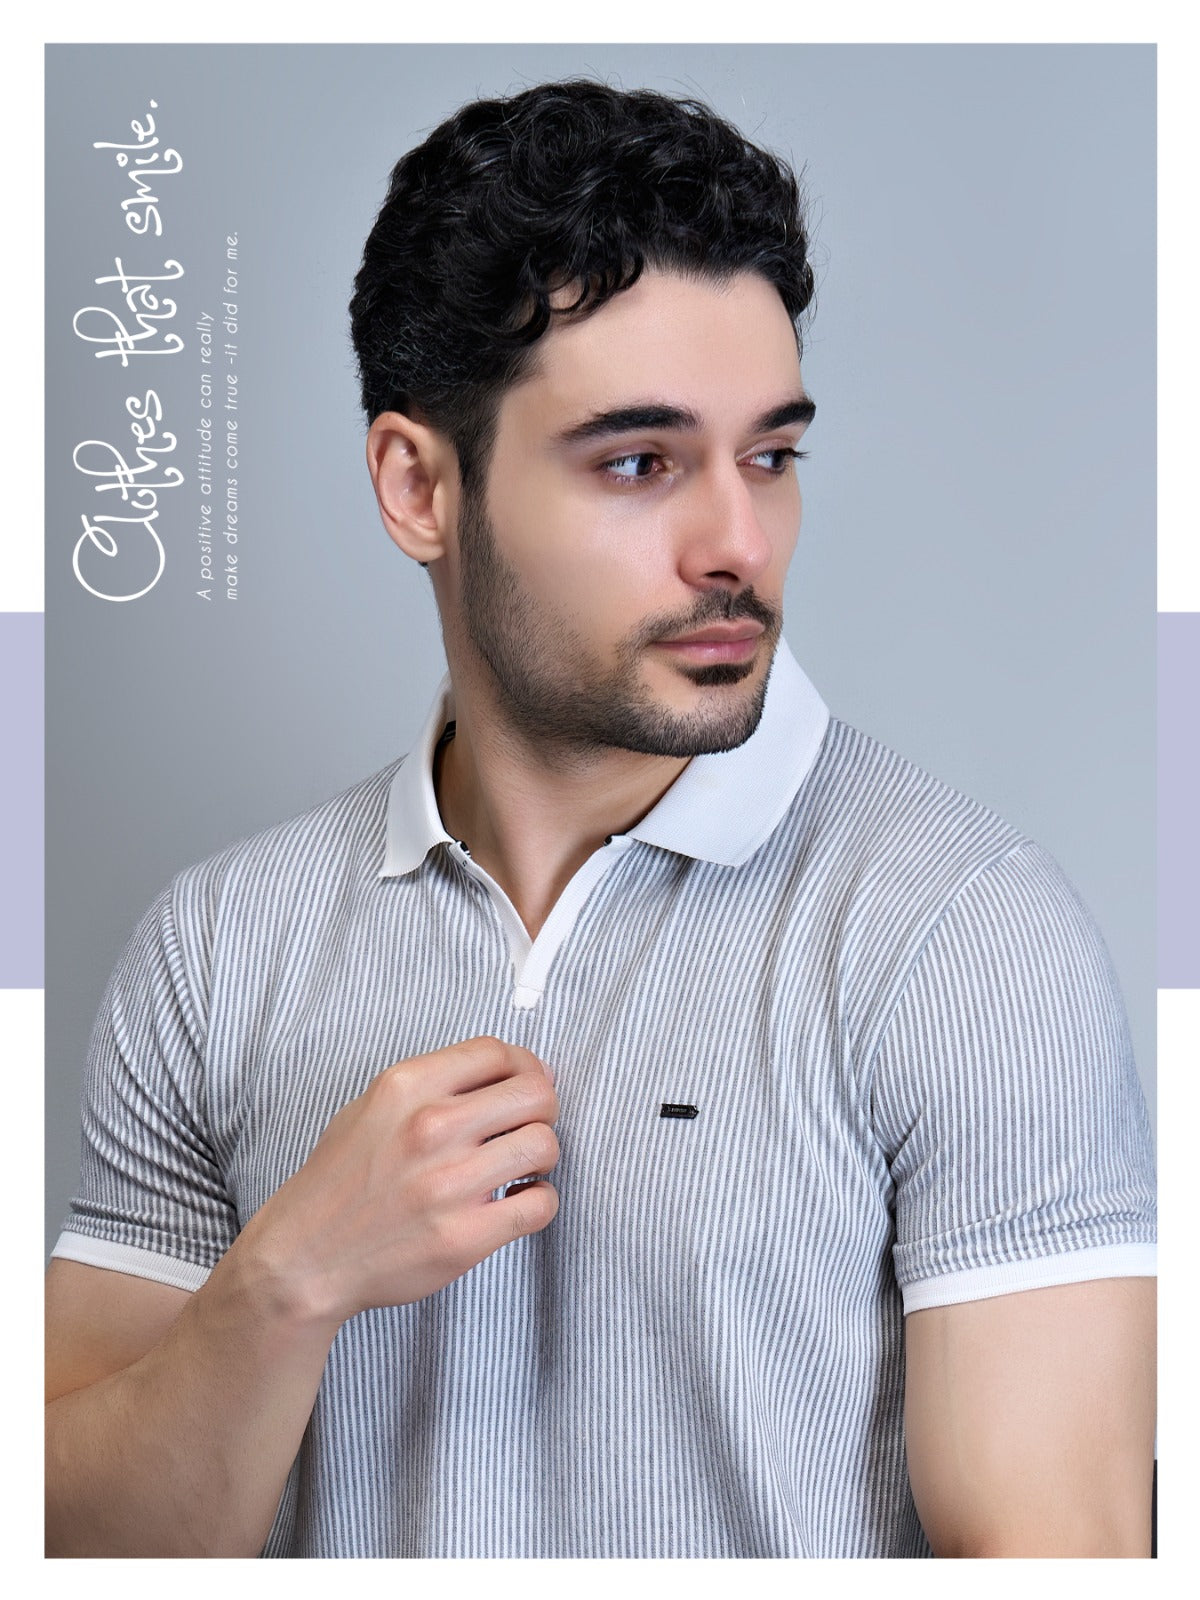 364 Everyday Imported Mens Tshirts Exporter Gujarat